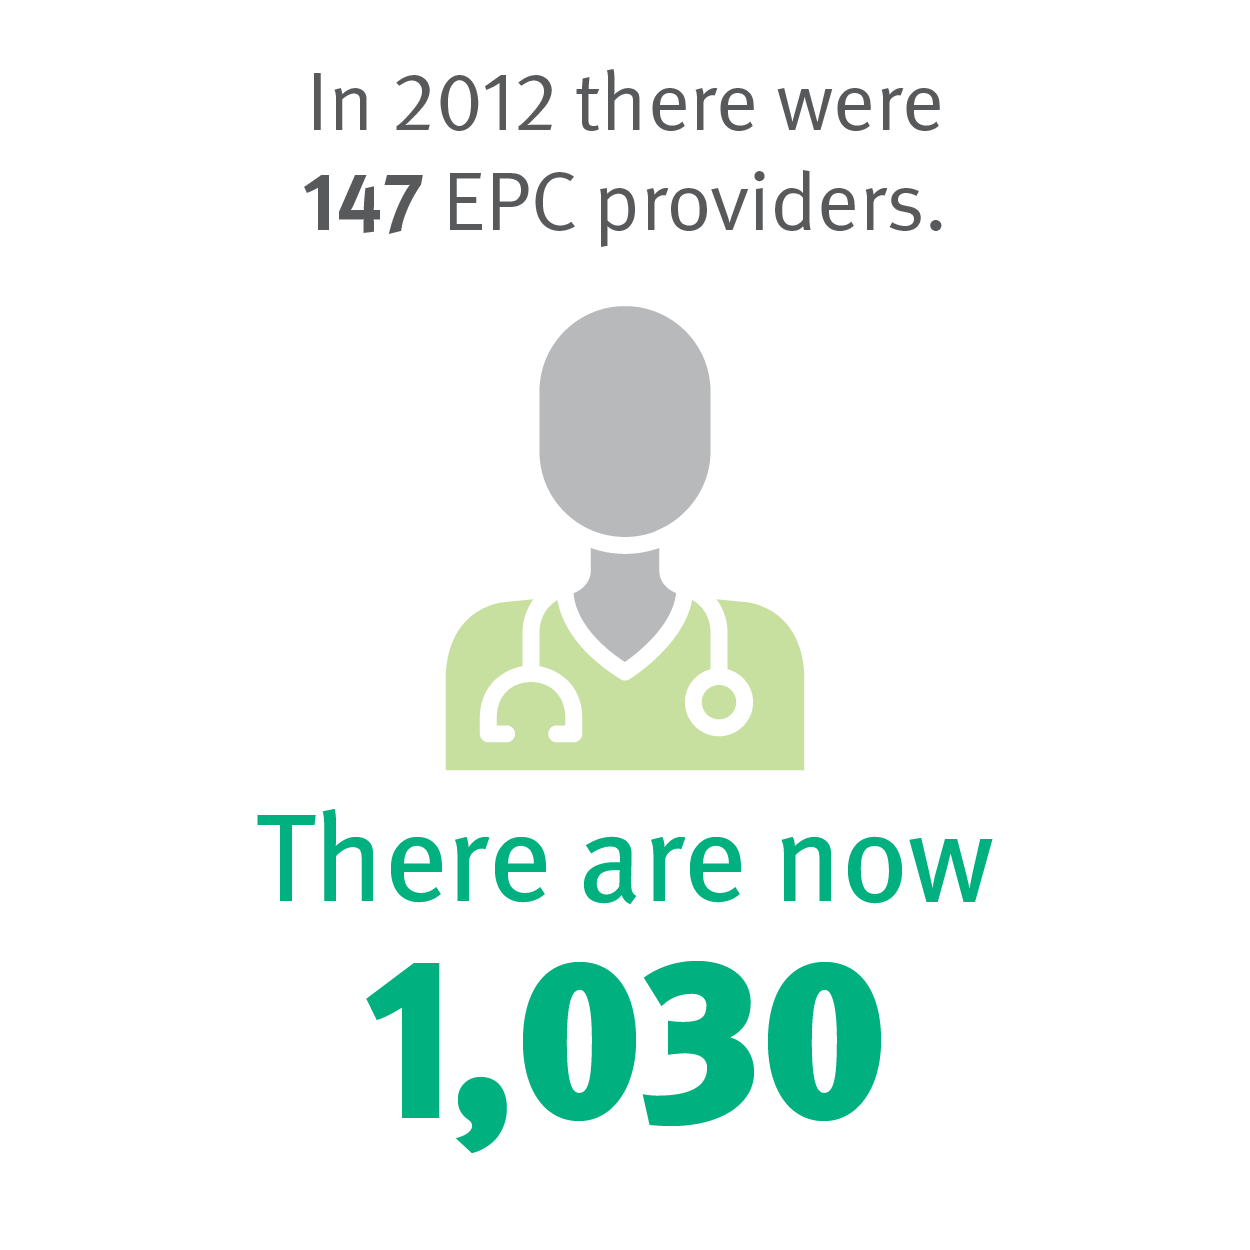 In 2012 there were 147 EPC Providers, now there are 1,030